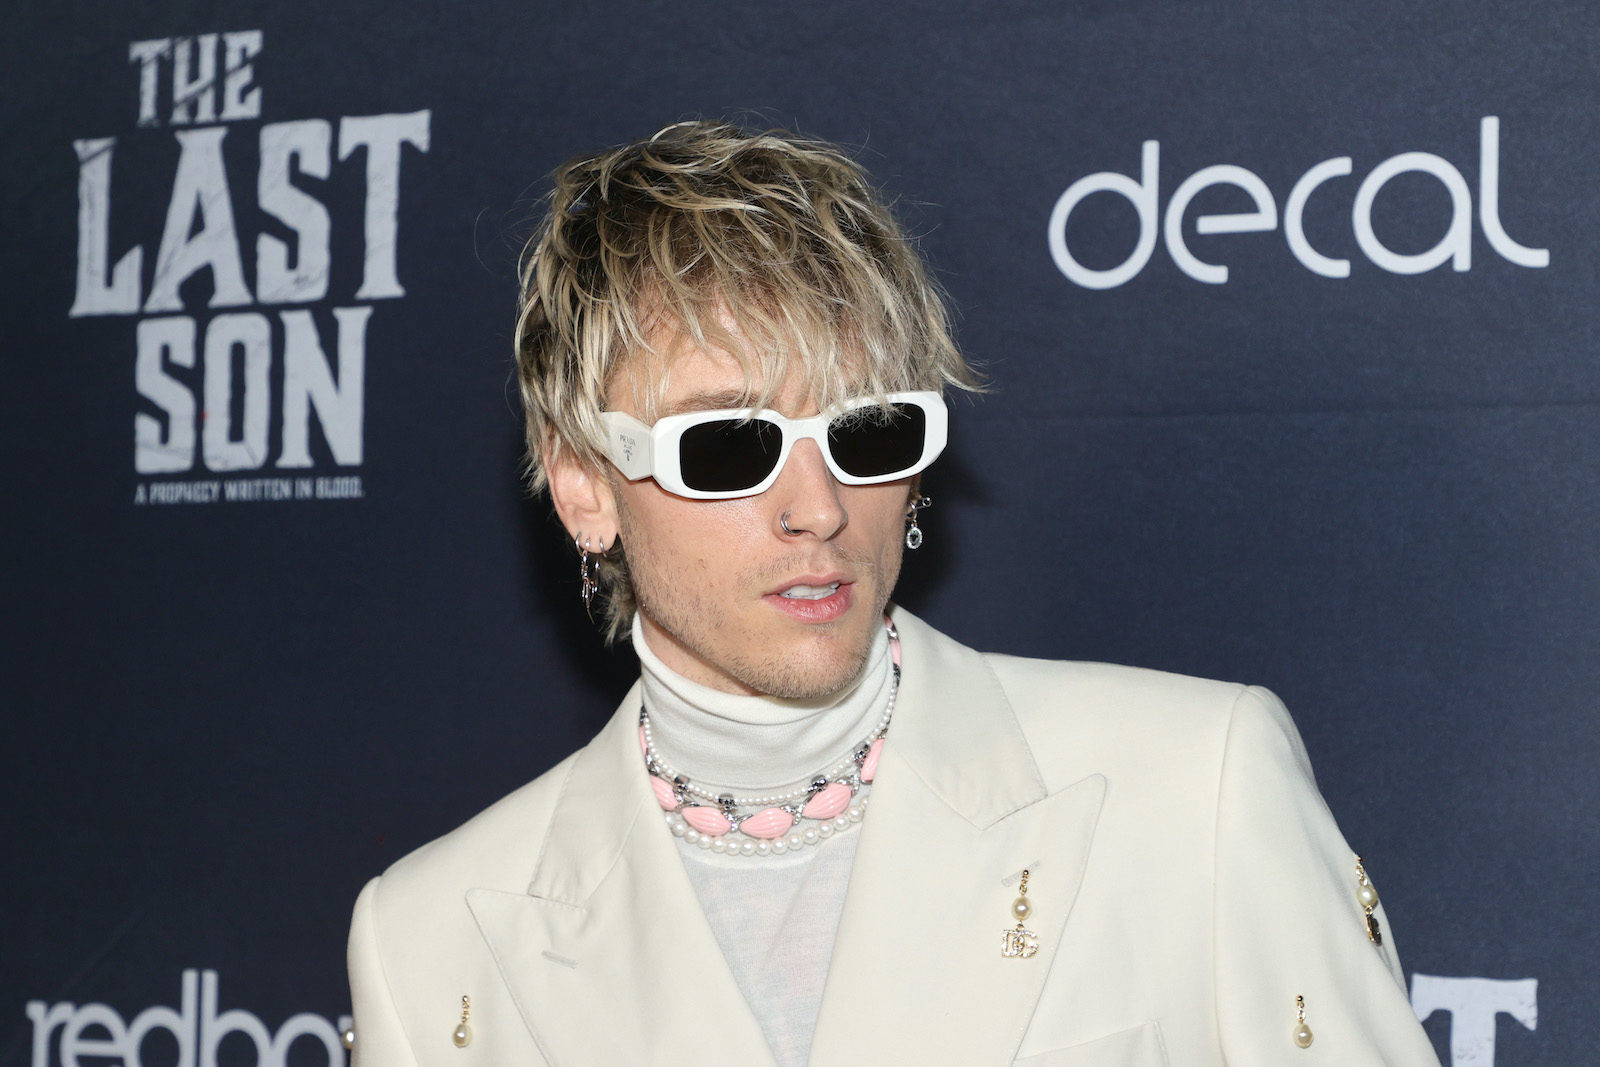 Machine Gun Kelly (Colson Baker) attends as Redbox hosts a red-carpet screening for the film The Last Son